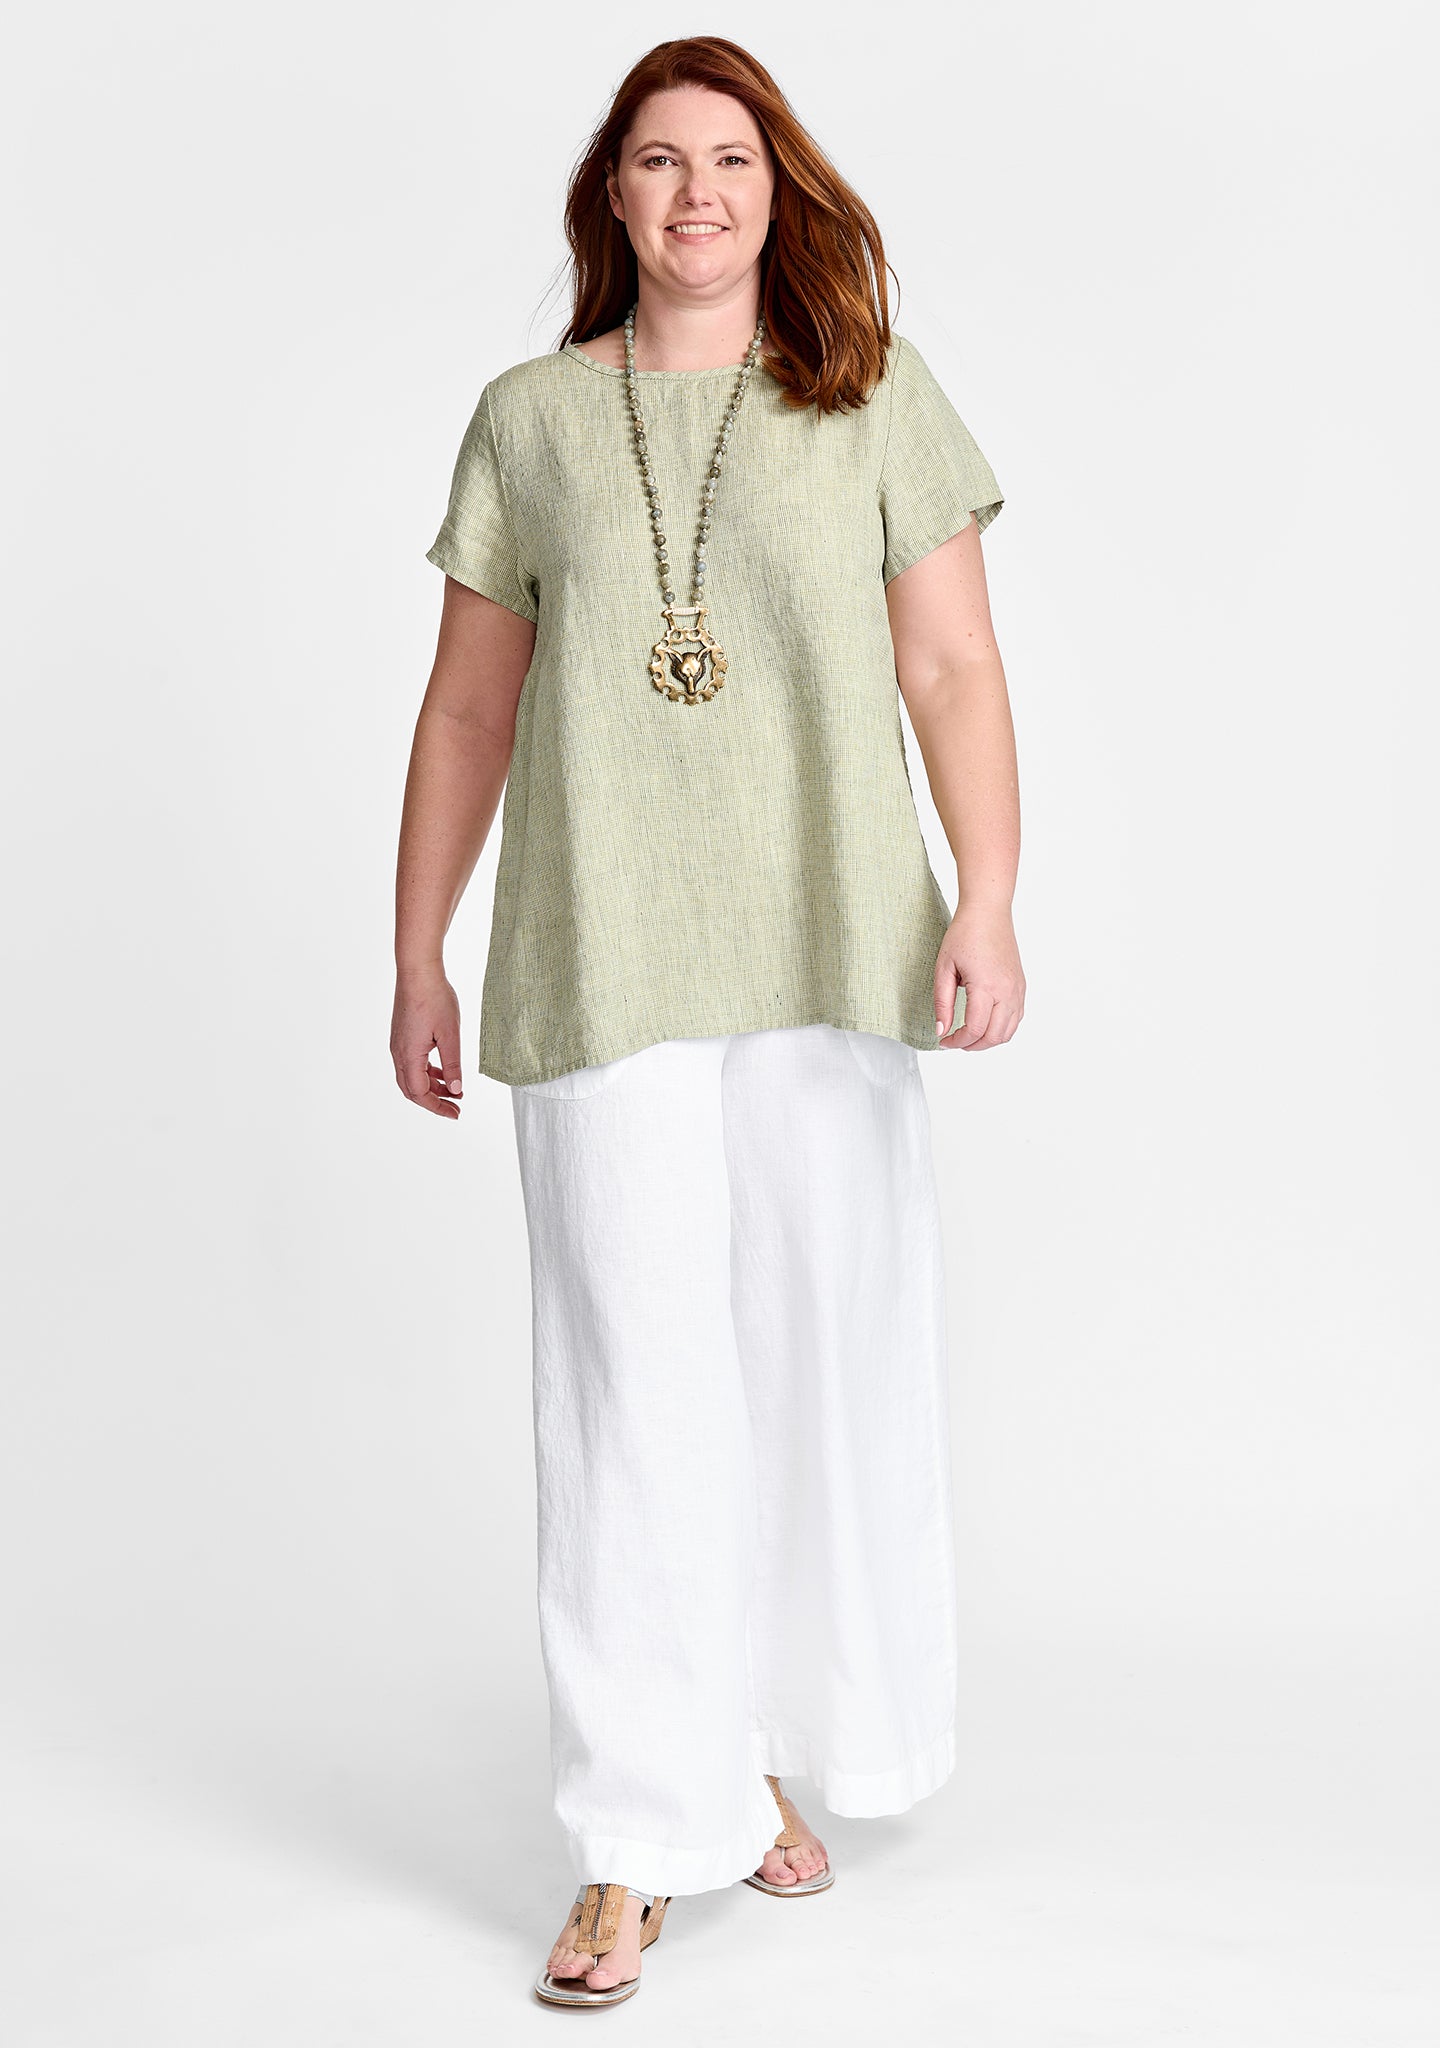 FLAX linen tee in green with linen pants in white